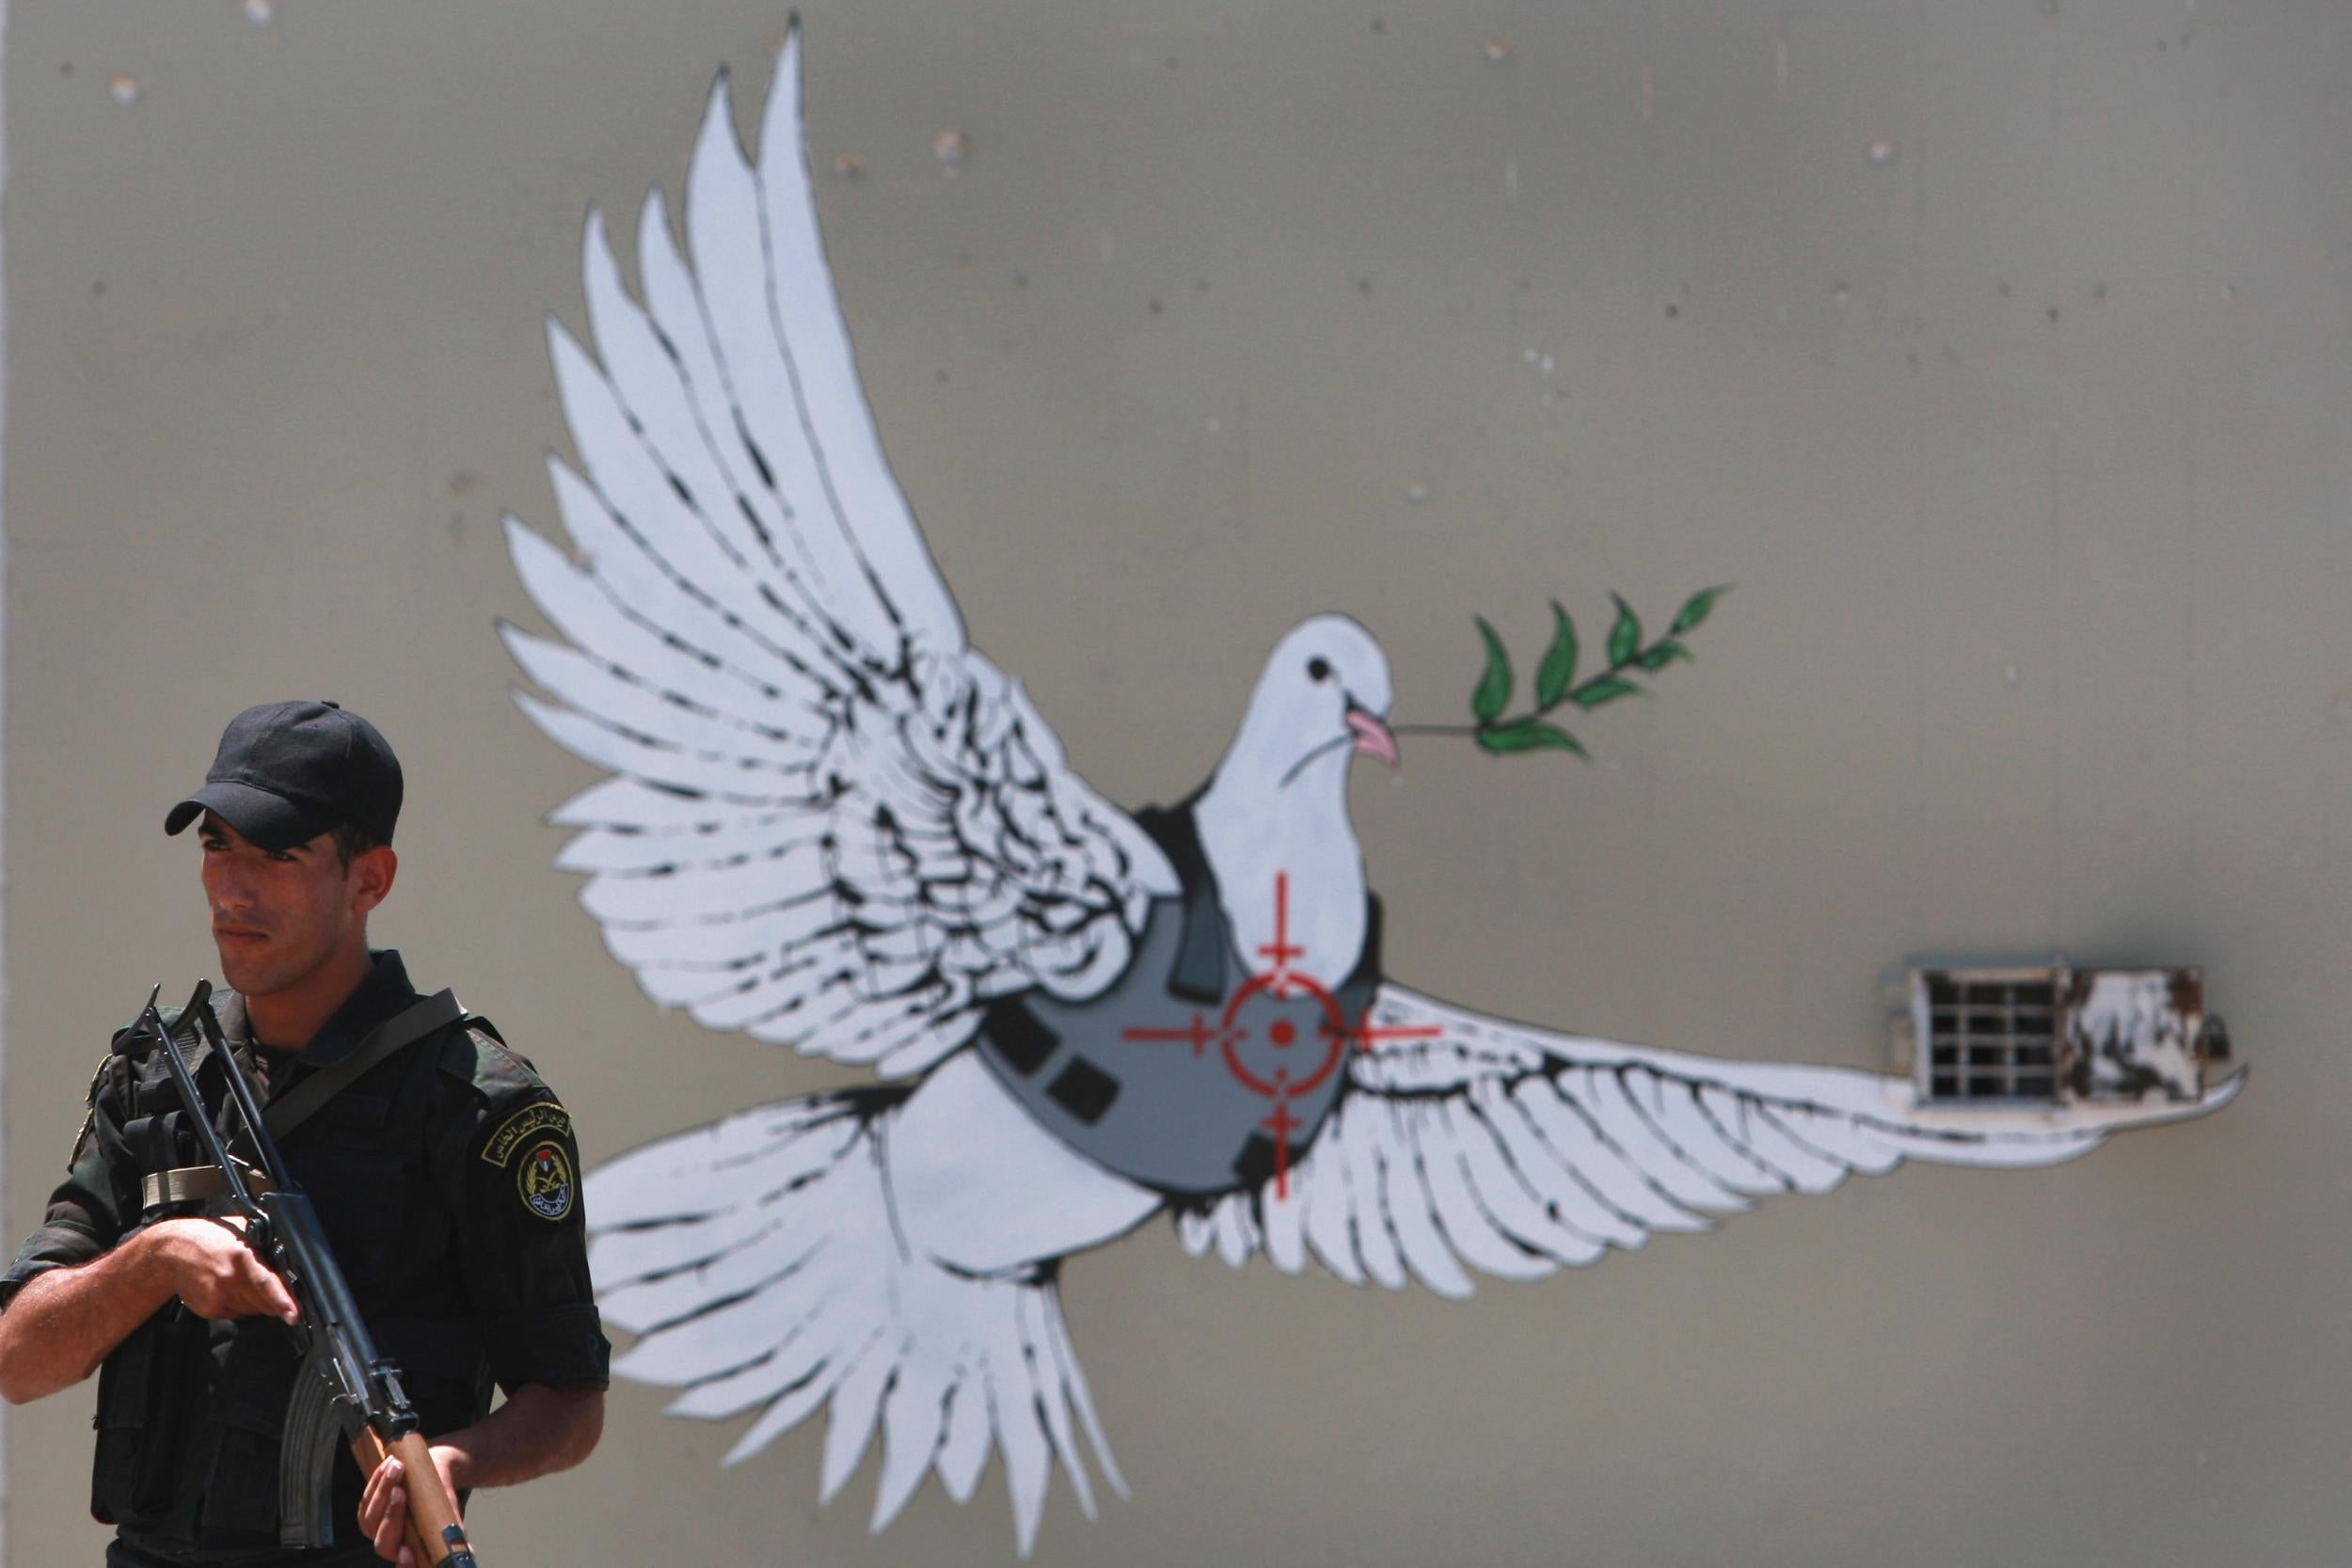 Banksy, whose work adorn parts of Israel’s separation wall, is claimed to have given a family-run guesthouse verbal consent to use his name (Getty)